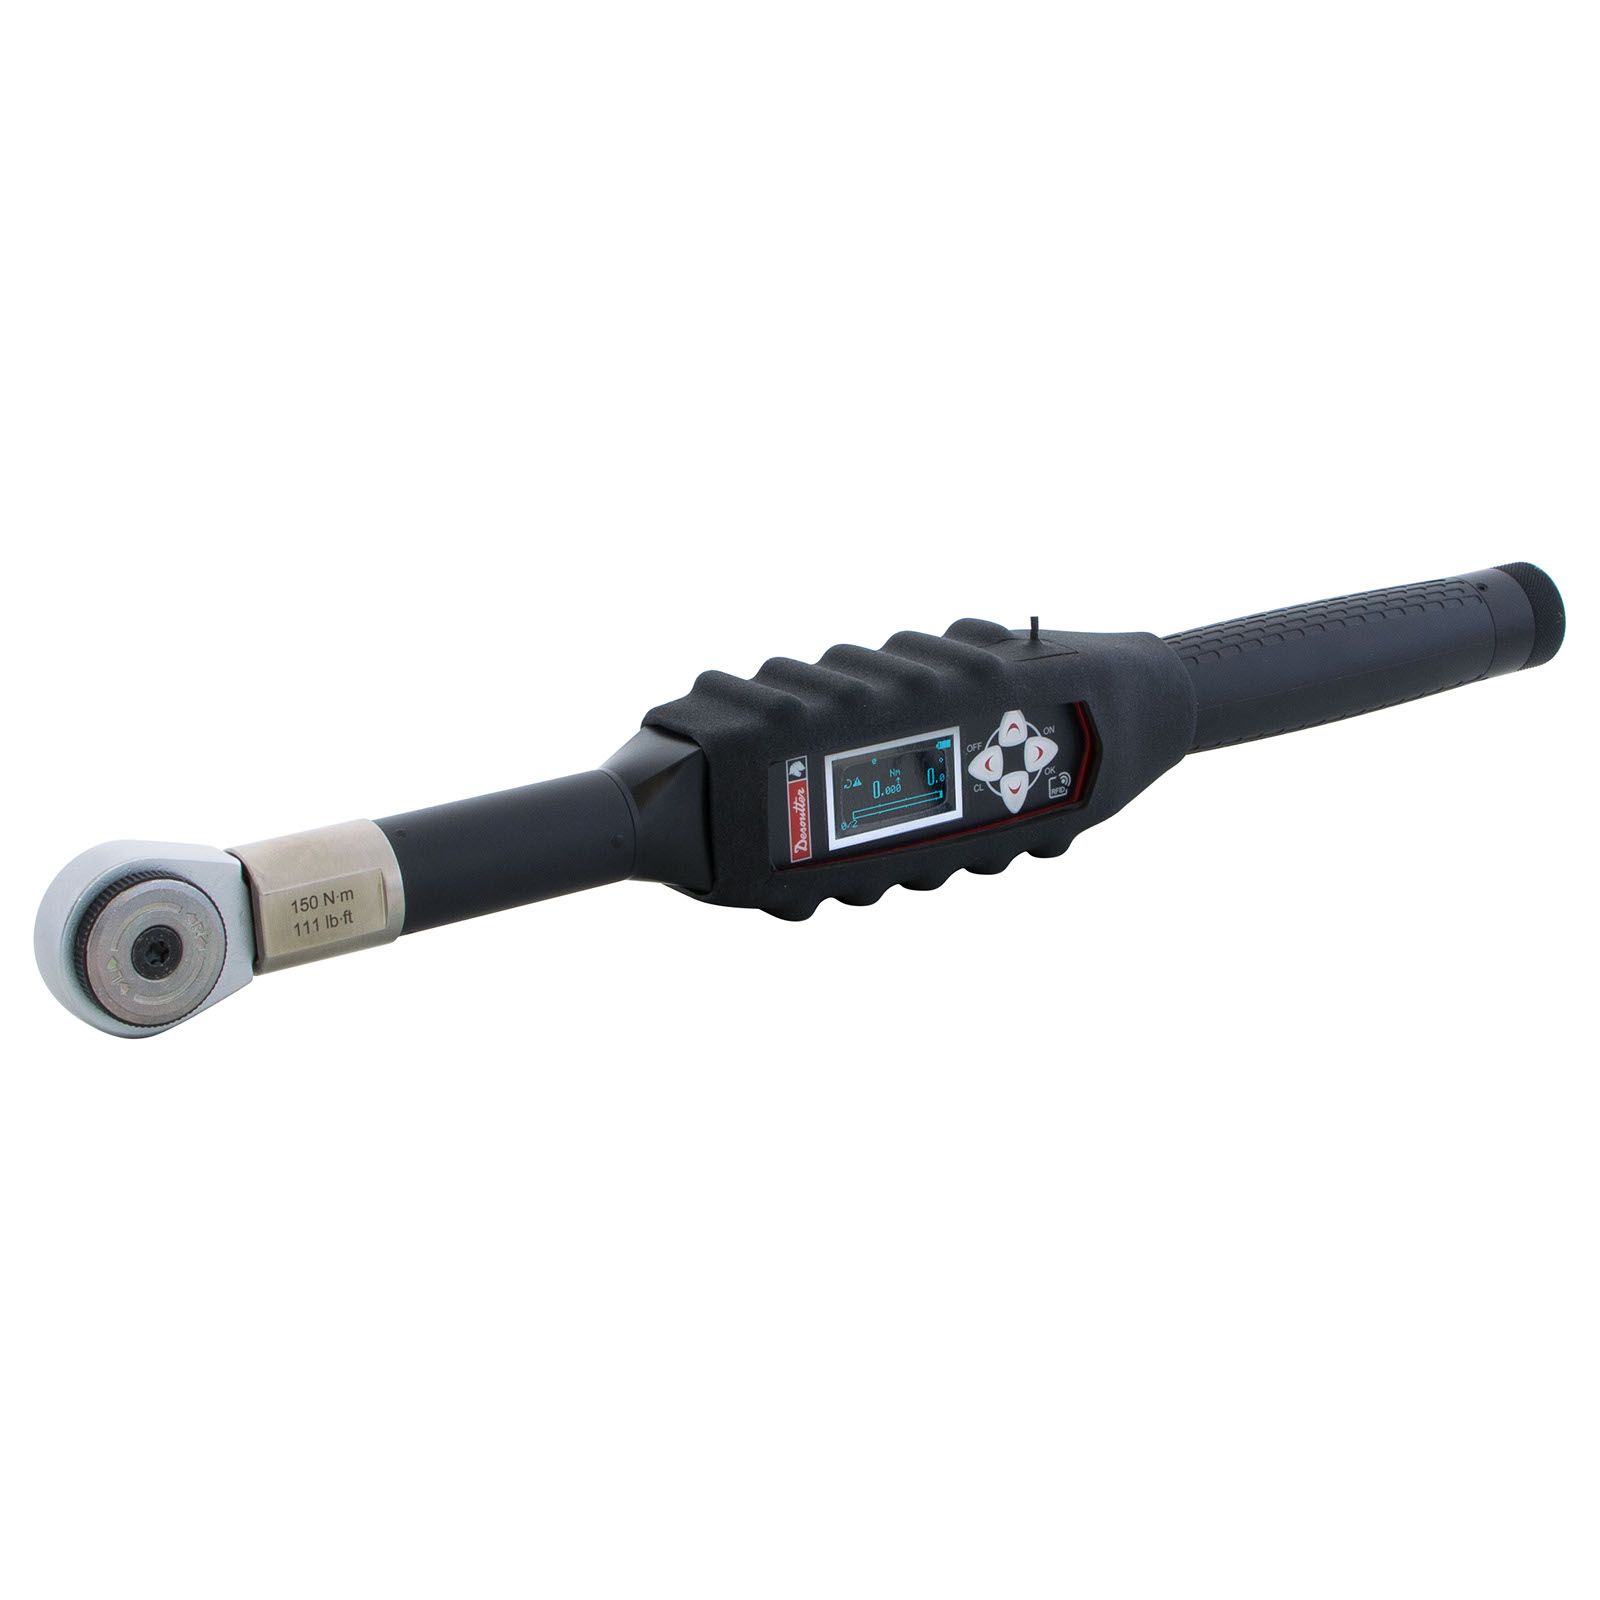 Q-Shield - S – Digital Smart Wrench product photo